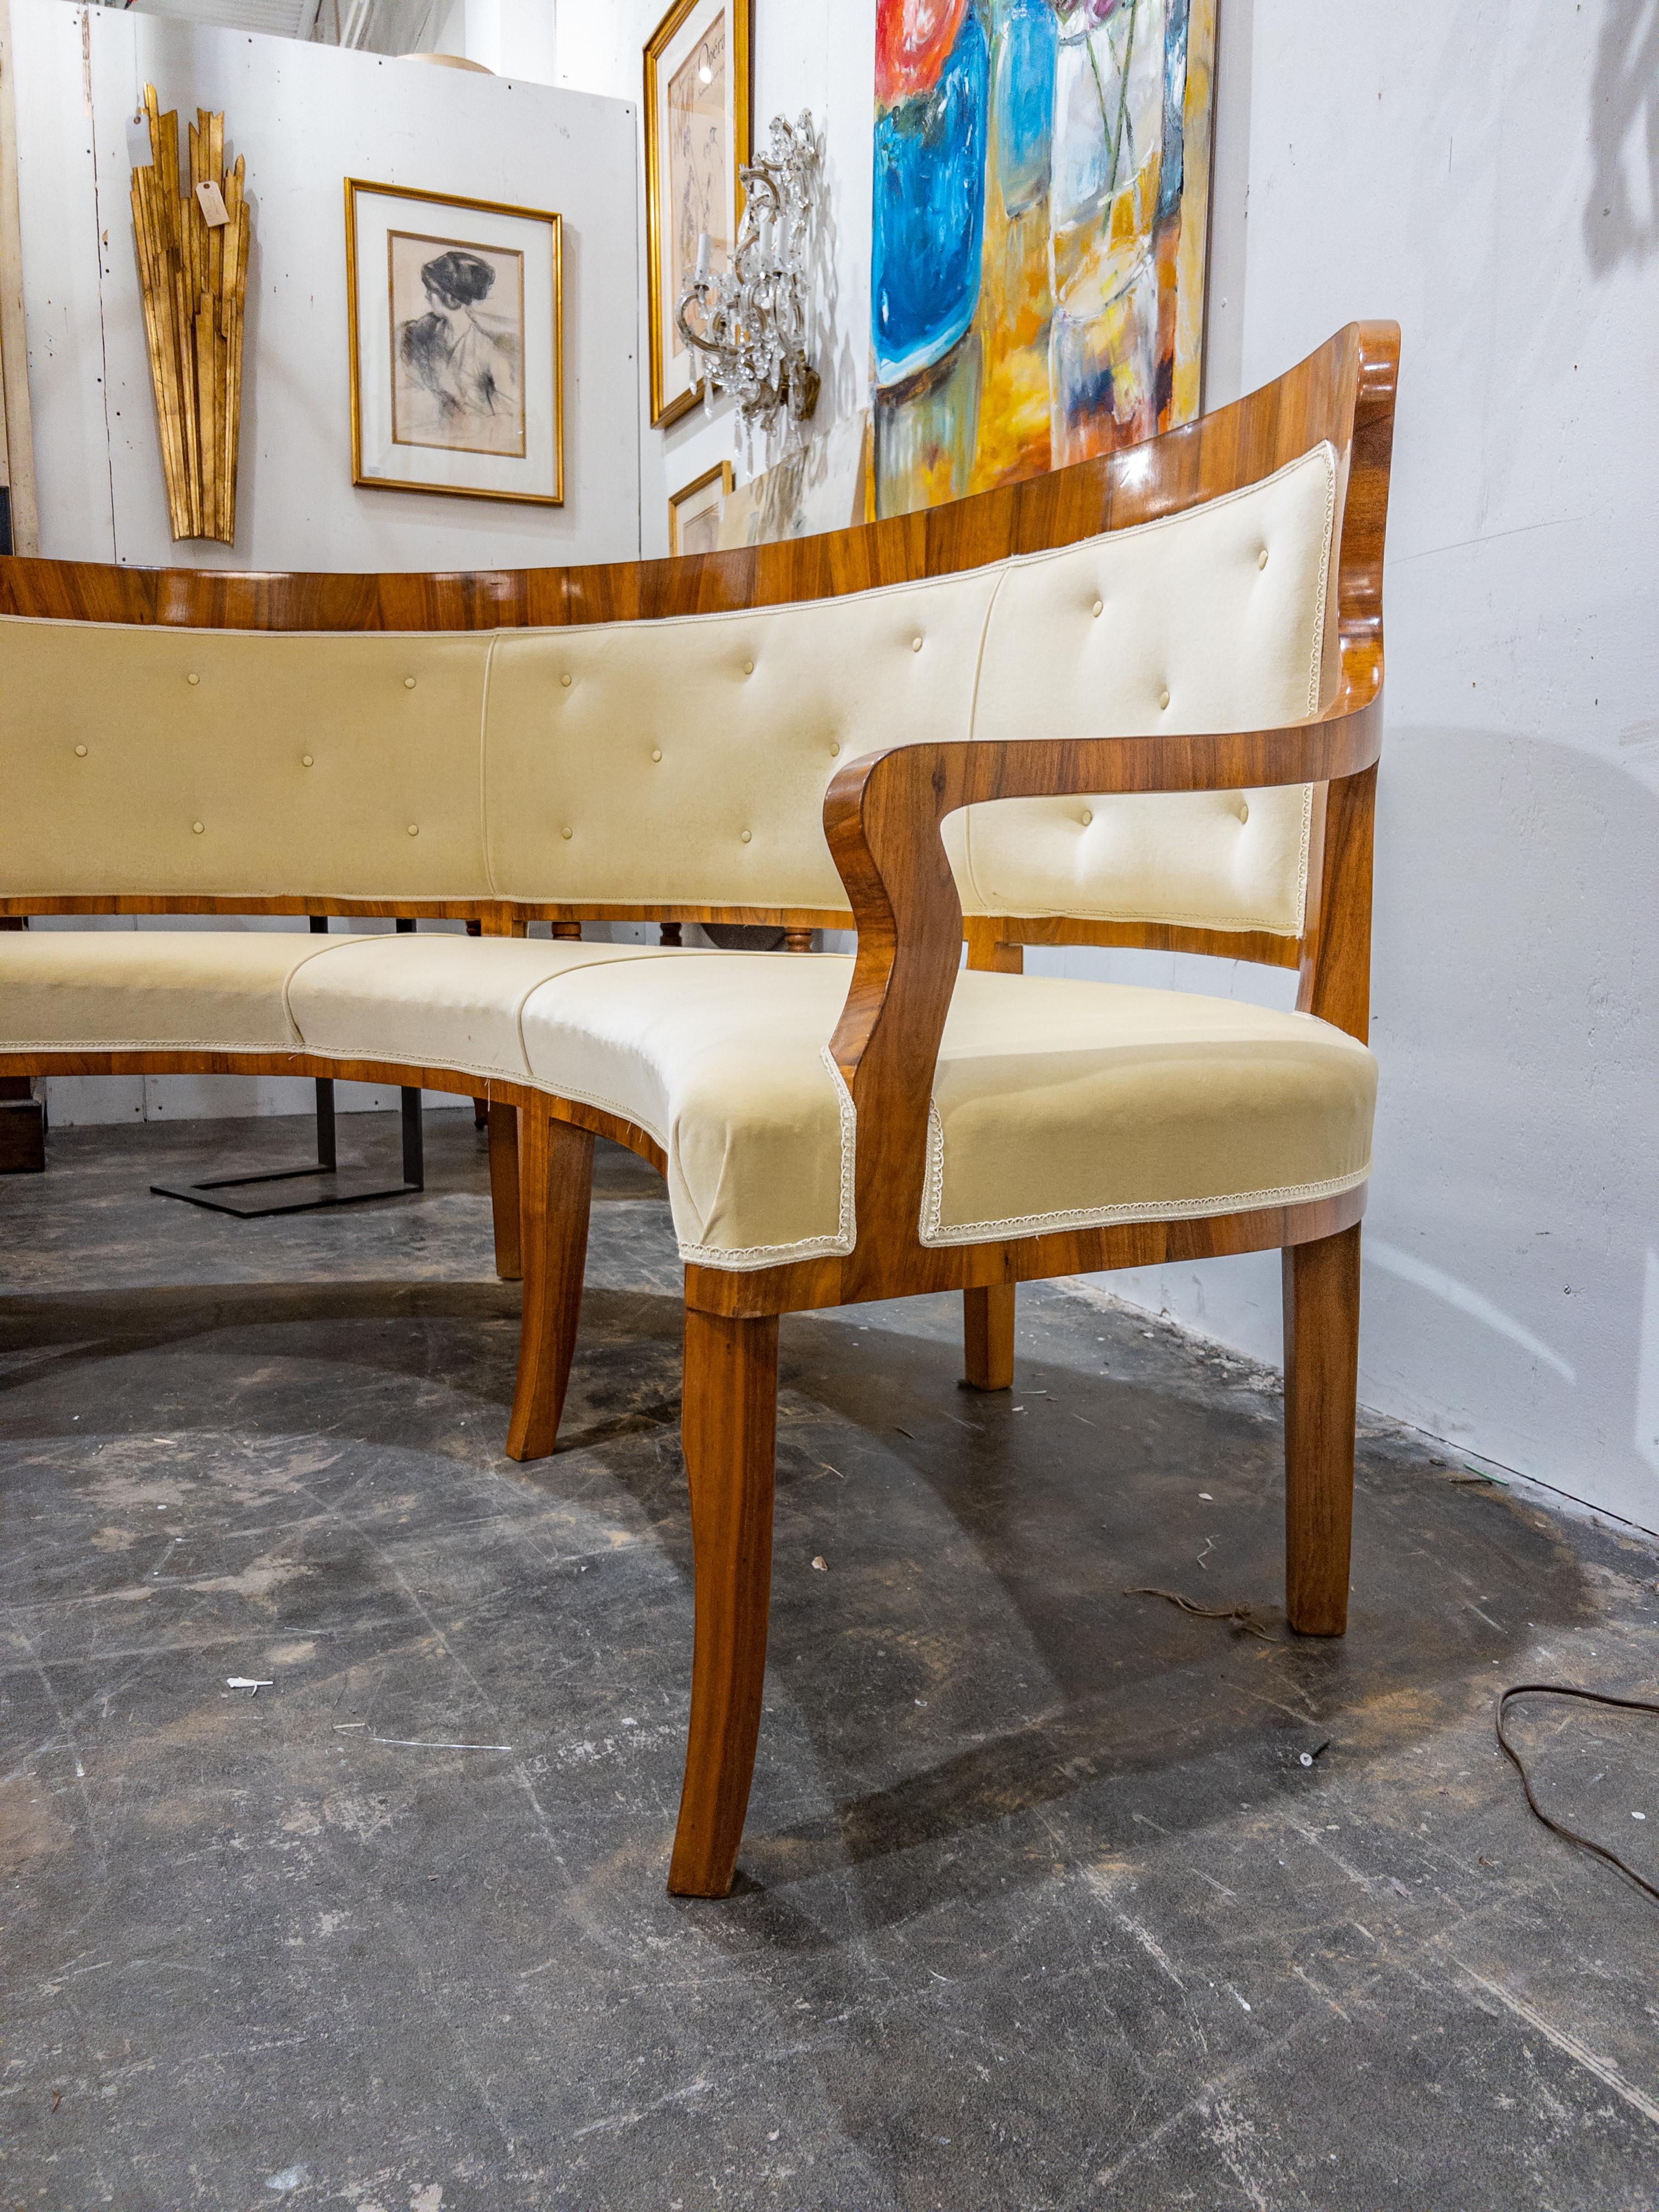 The Biedermeier Period Rounded Upholstered Settee is a splendid representation of the classic Biedermeier style, which emerged during the early 19th century in Central Europe. This exquisite piece of furniture boasts a highly polished wood frame.